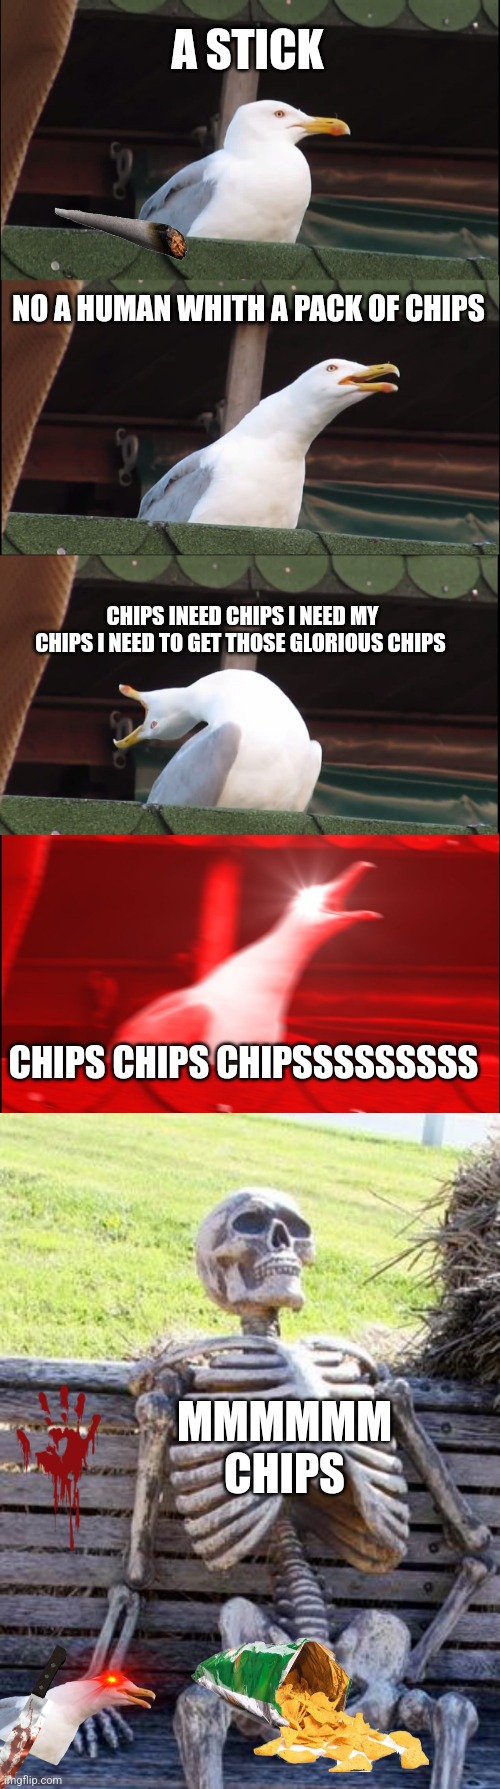 A STICK; NO A HUMAN WHITH A PACK OF CHIPS; CHIPS INEED CHIPS I NEED MY CHIPS I NEED TO GET THOSE GLORIOUS CHIPS; CHIPS CHIPS CHIPSSSSSSSSS; MMMMMM CHIPS | image tagged in memes,inhaling seagull,waiting skeleton | made w/ Imgflip meme maker